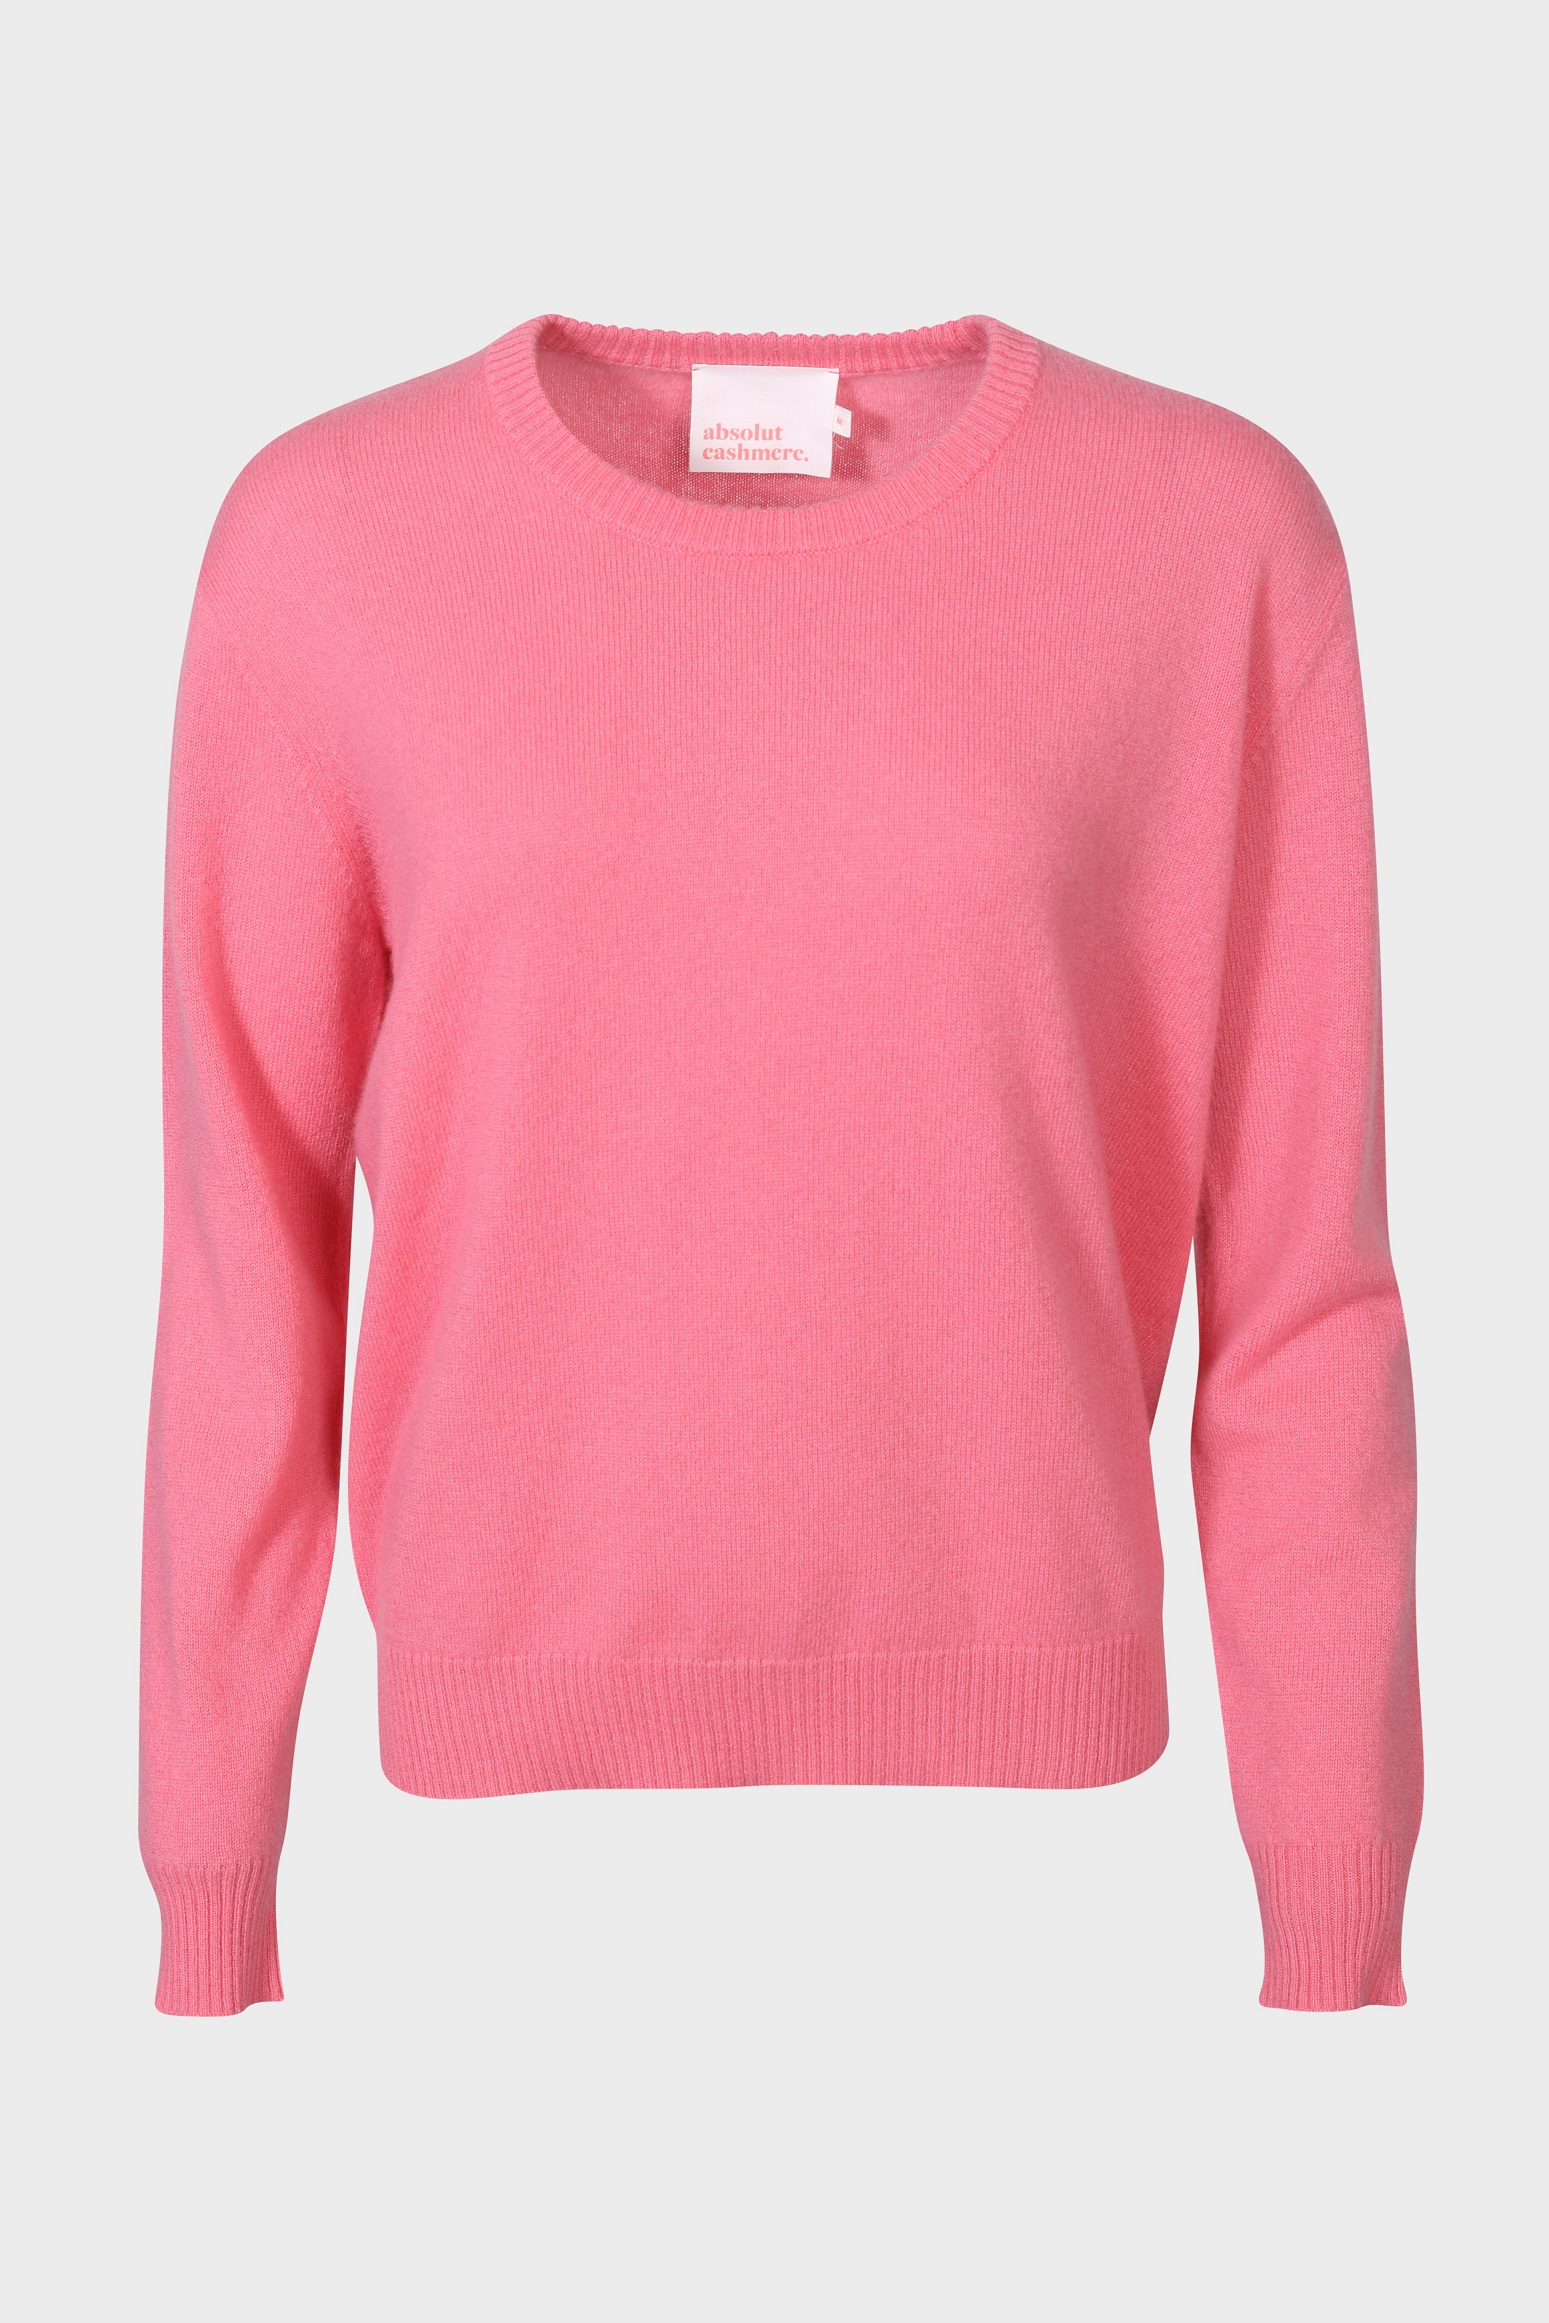 ABSOLUT CASHMERE Sweater Ysee Flamingo